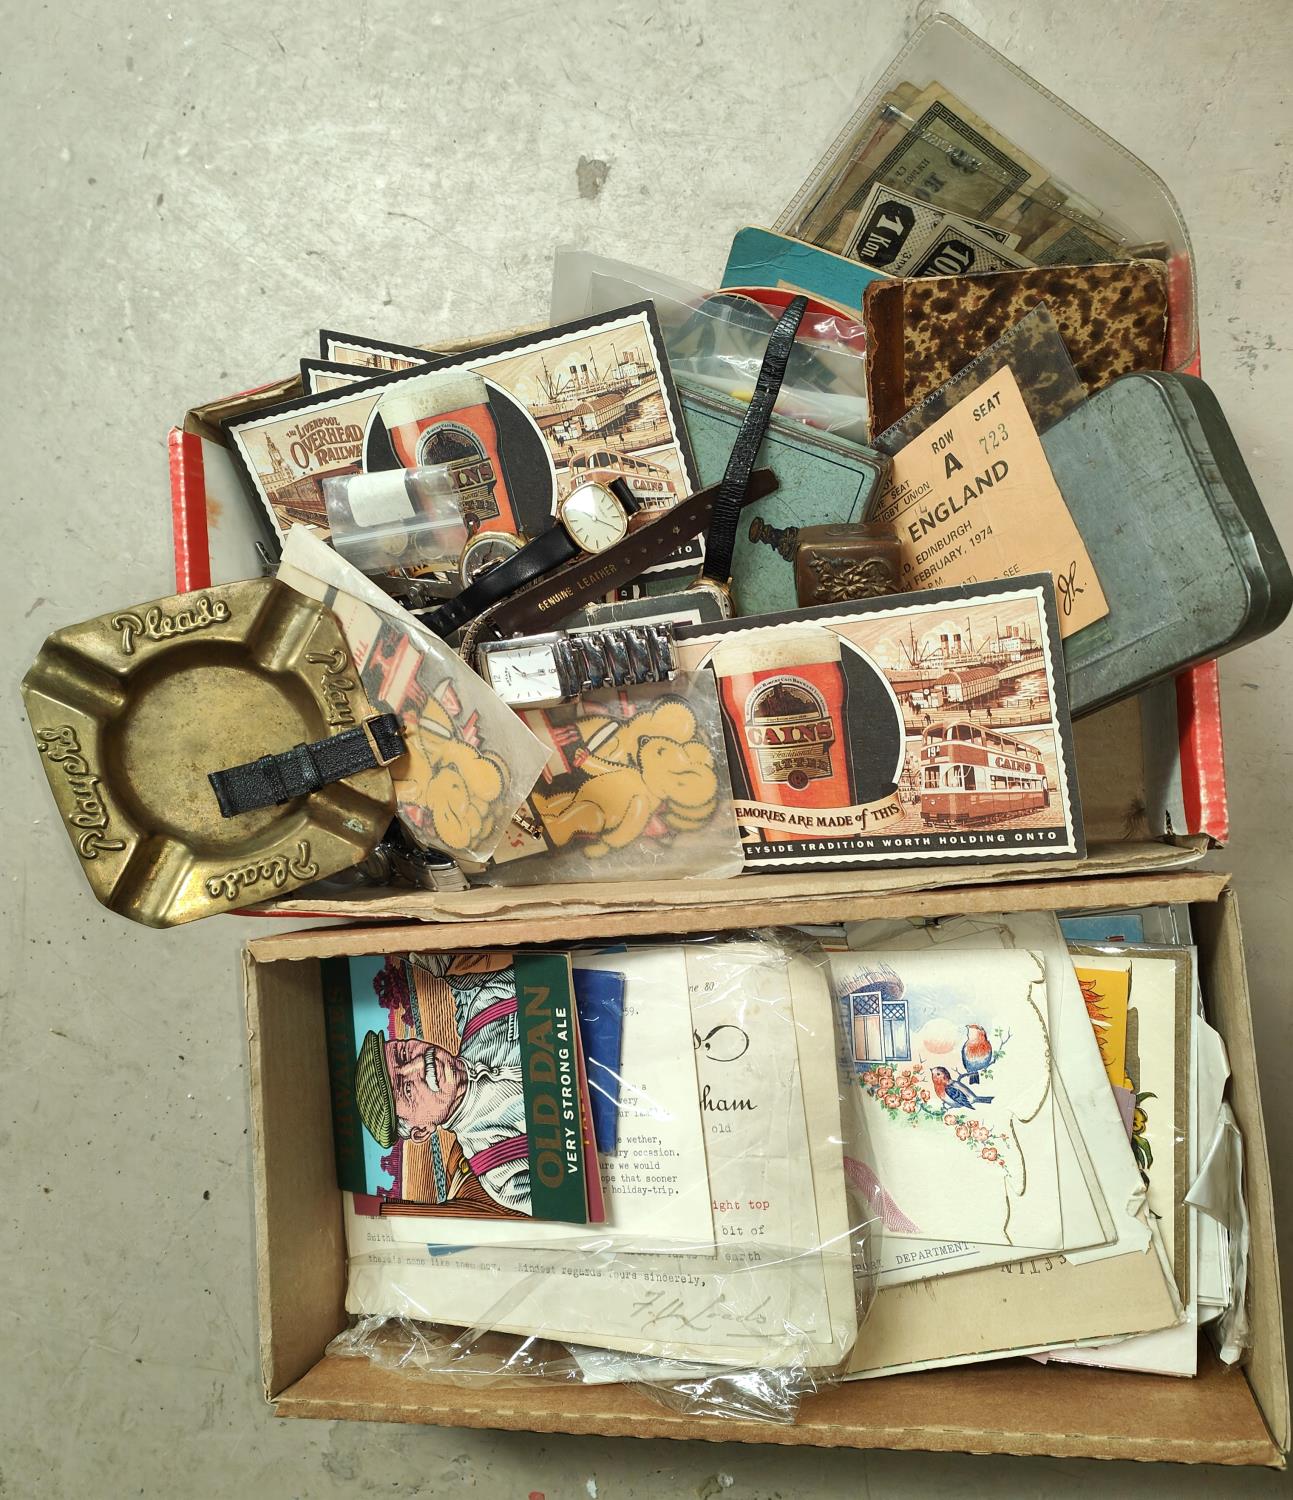 A quantity of ephemera including beermats, bottle labels etc. and other collectables.